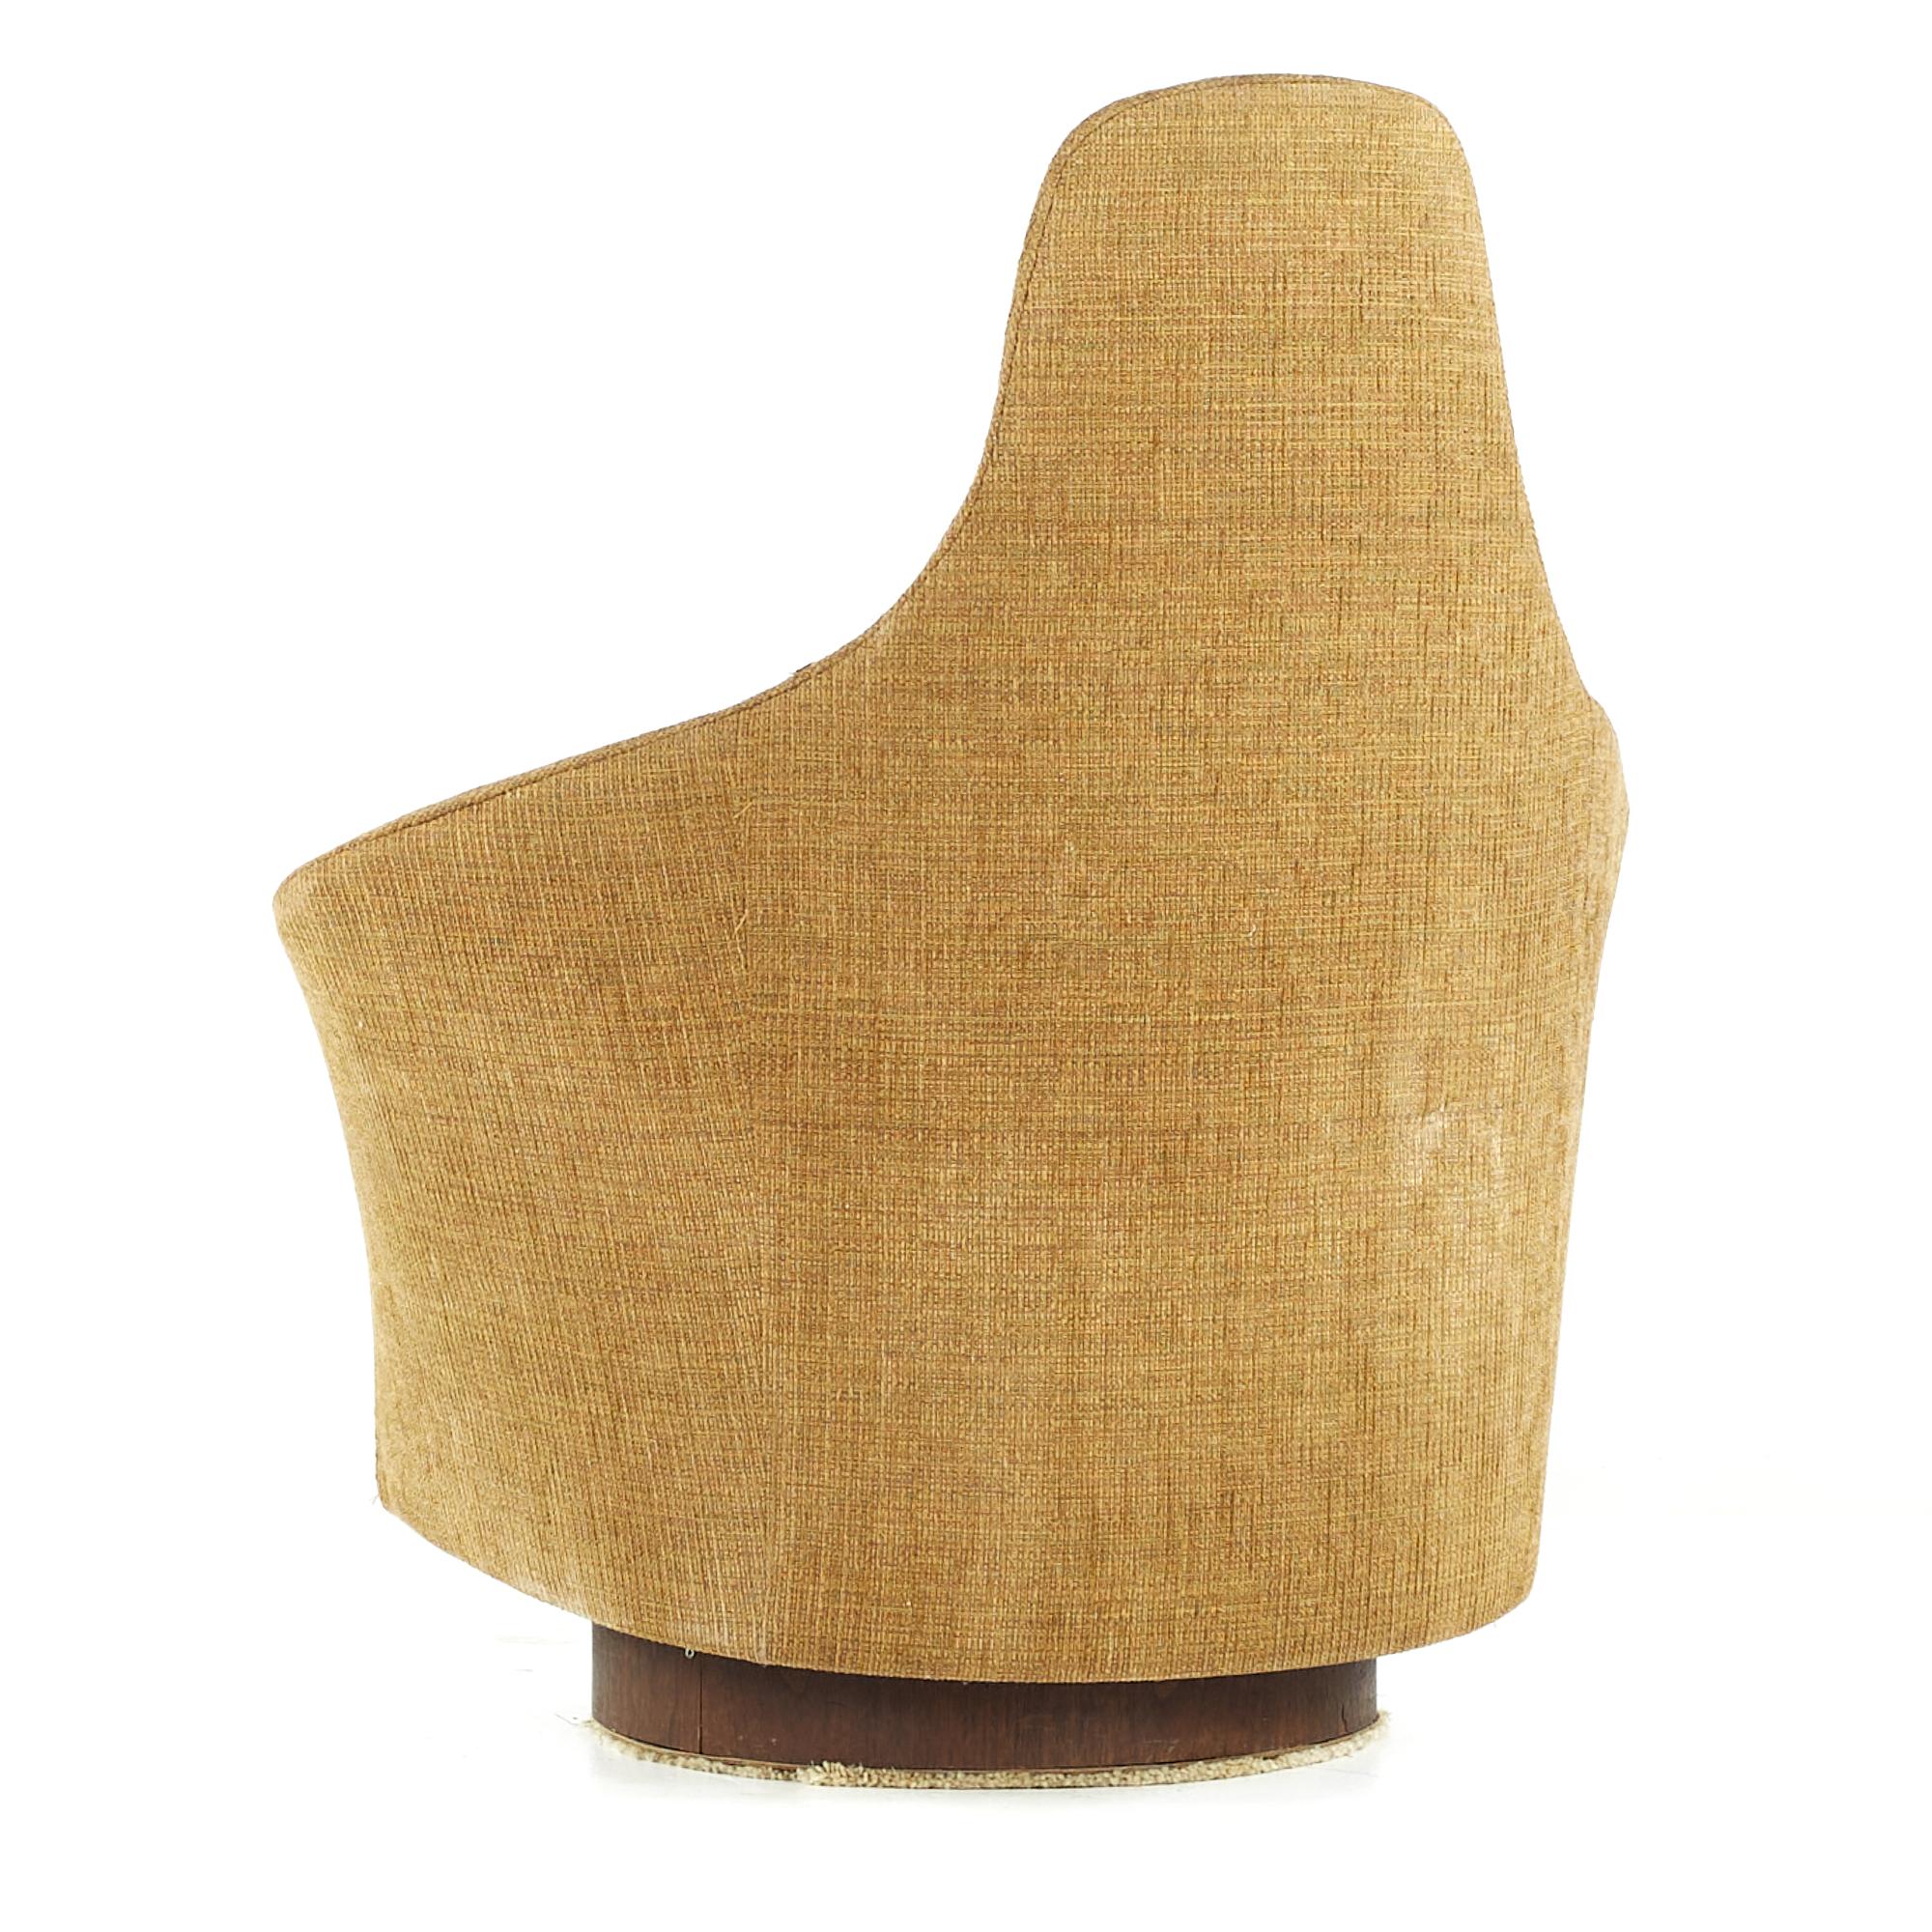 Late 20th Century Adrian Pearsall for Craft Associates Midcentury Swivel Tilt Chair For Sale